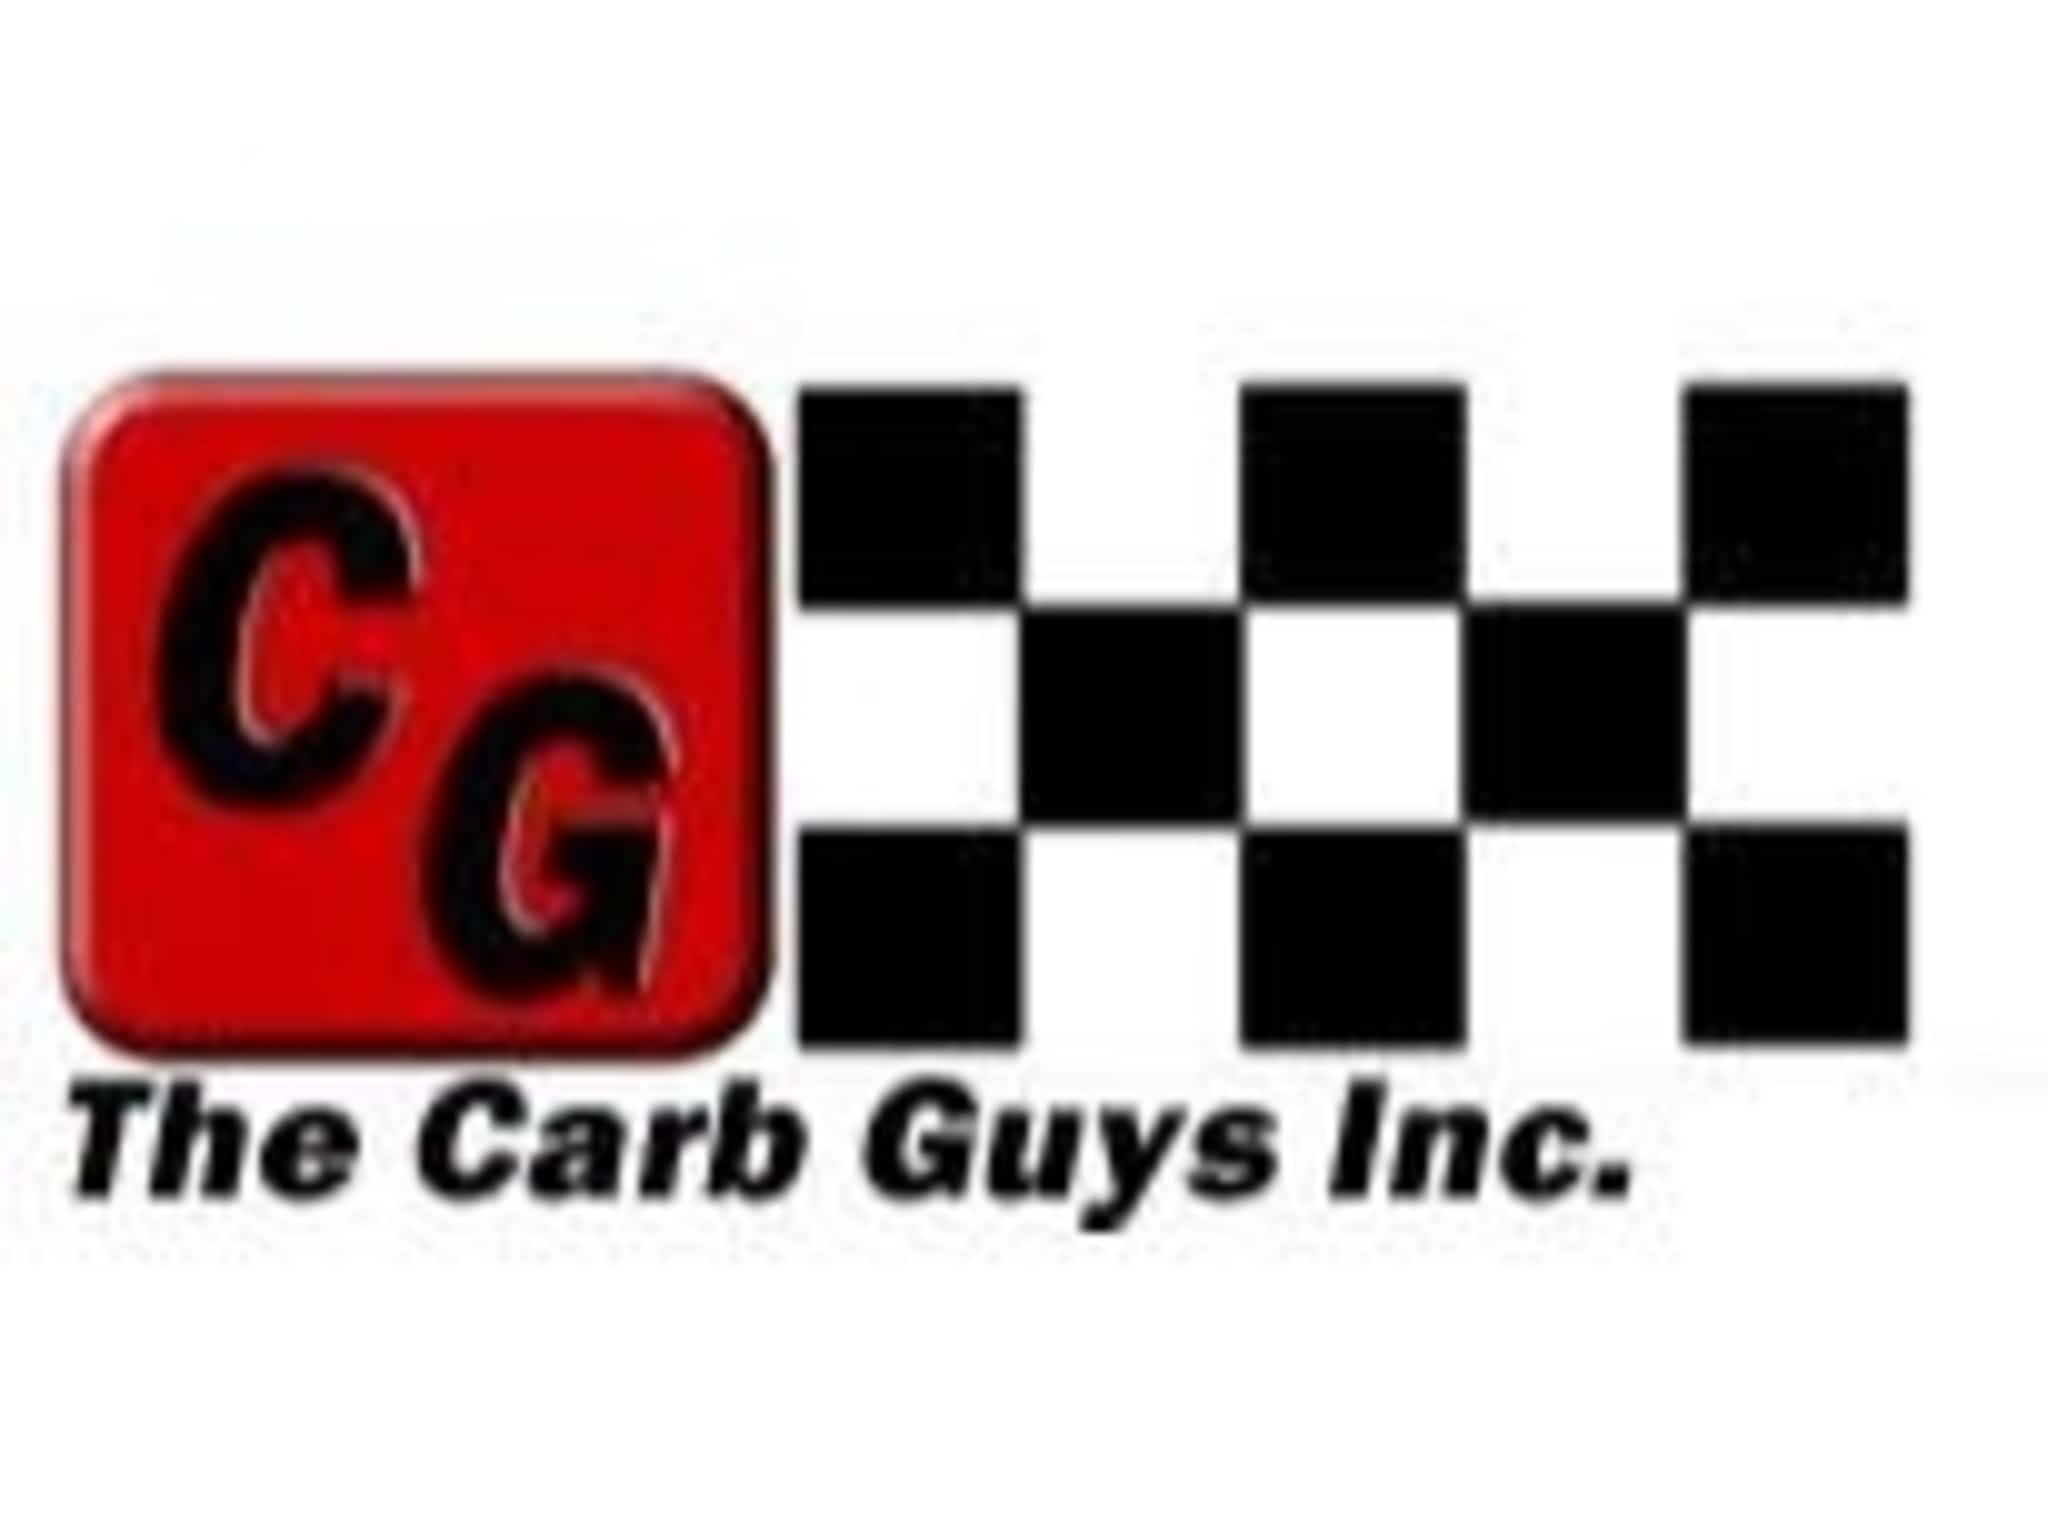 photo The Carb Guys Inc.